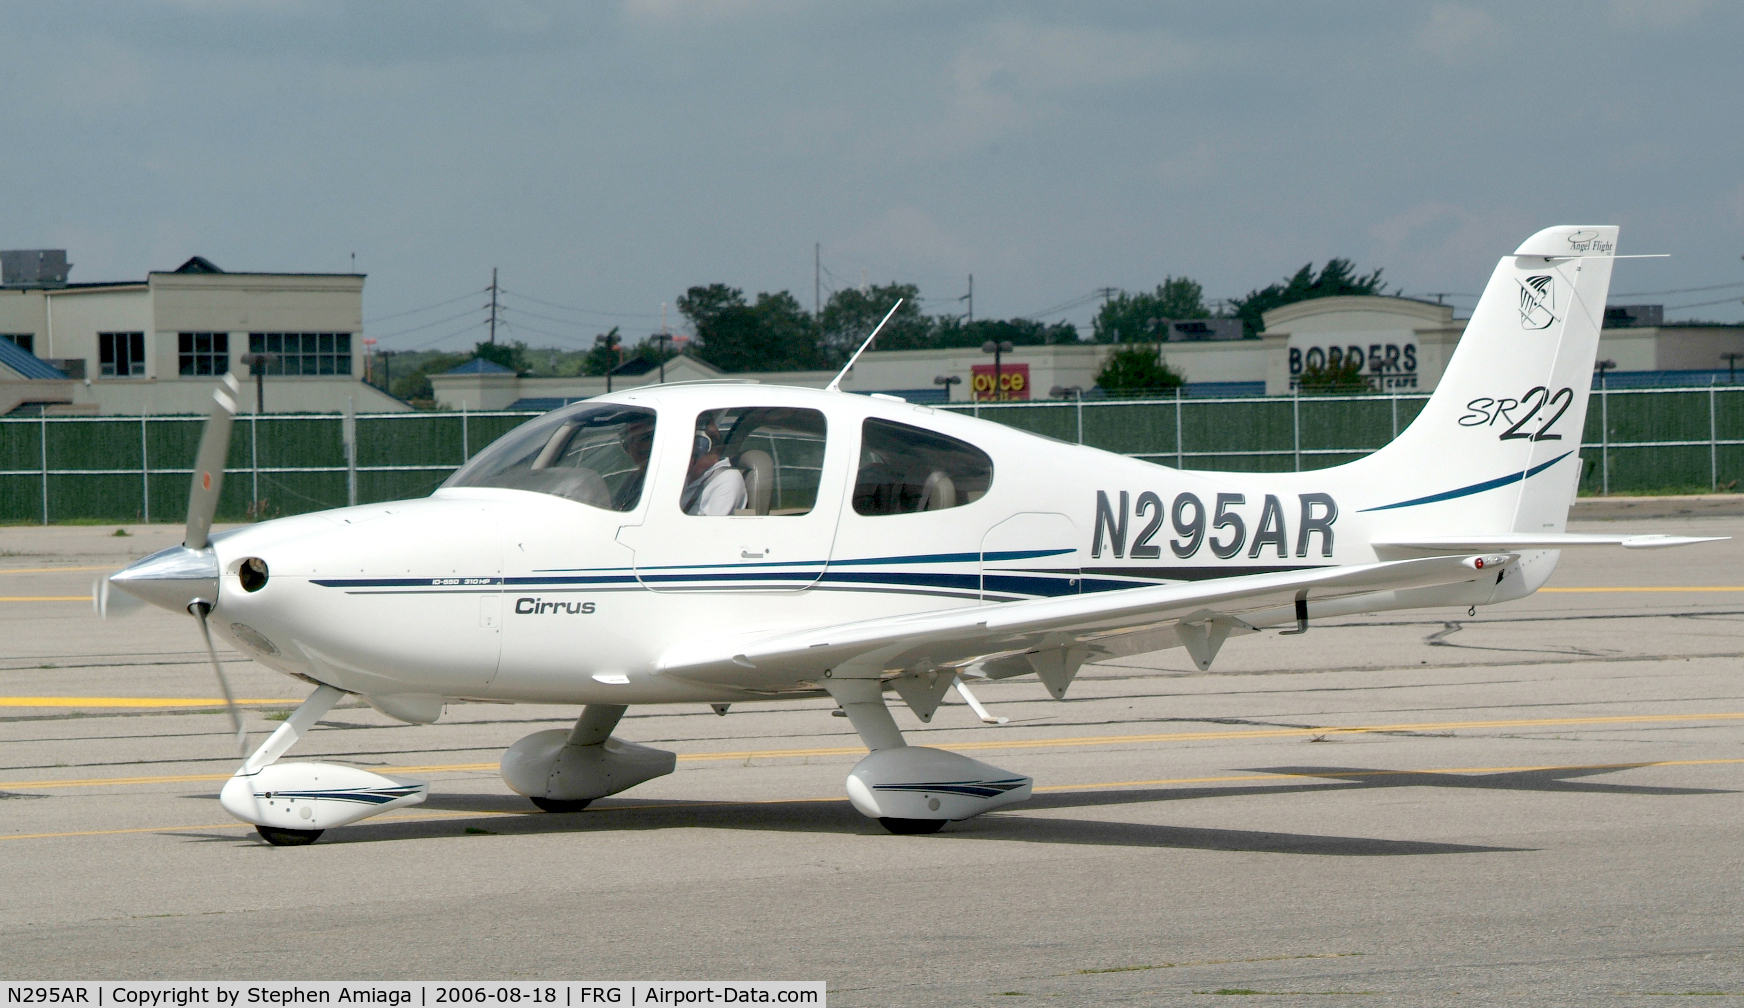 N295AR, 2001 Cirrus SR22 C/N 0028, Cirrus doing a runup before taking 19 for departure.